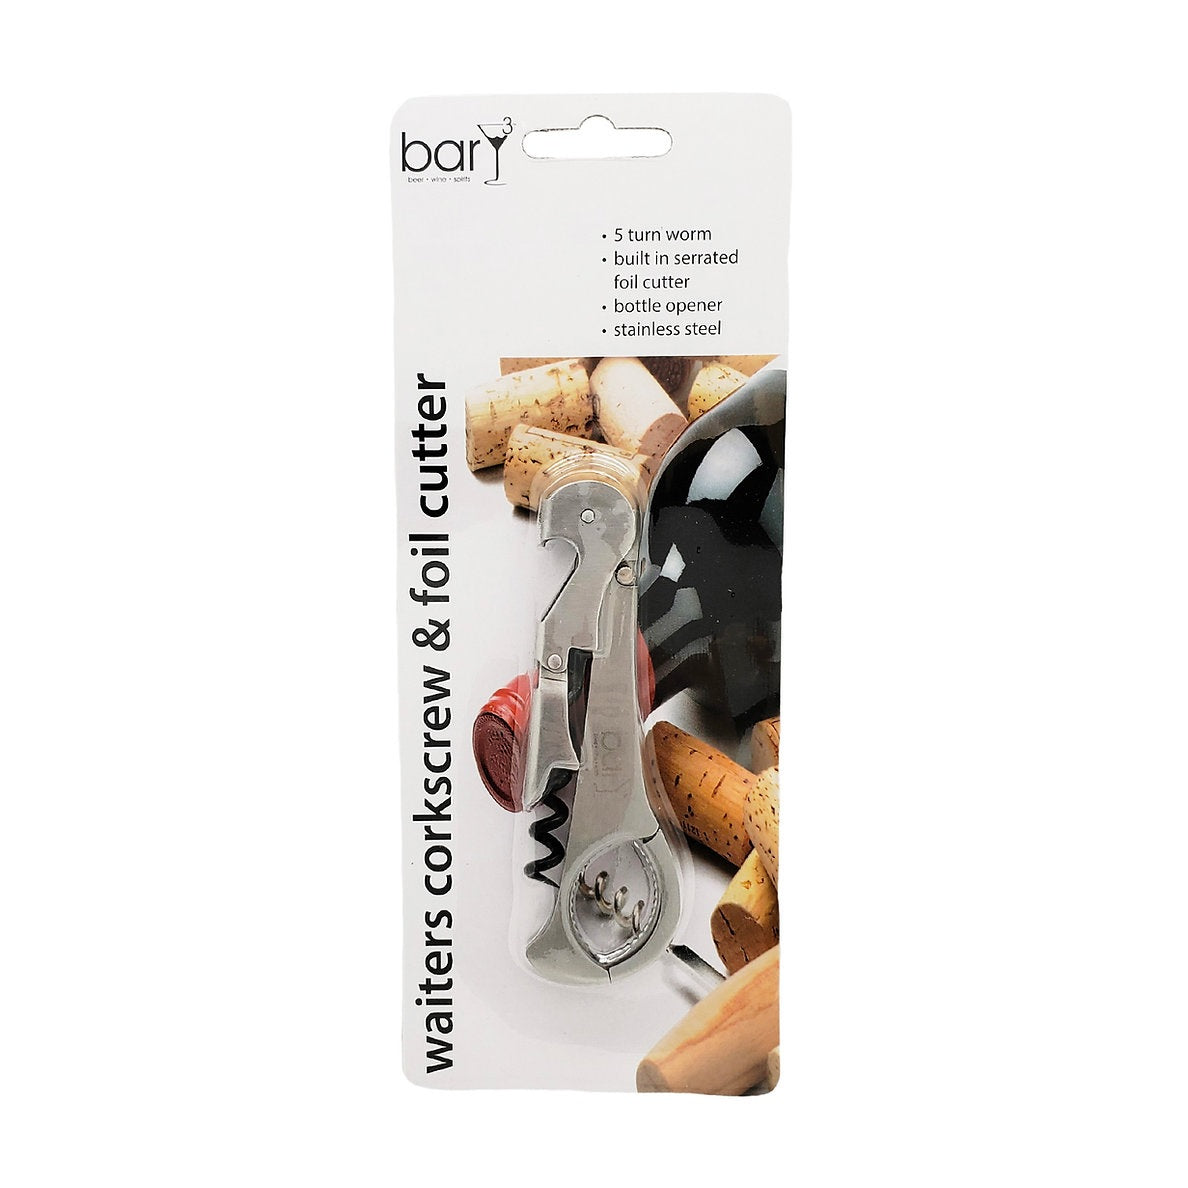 BarY3 BAR-0142 Waiter's Corkscrew With Foil Cutter, Stainless Steel